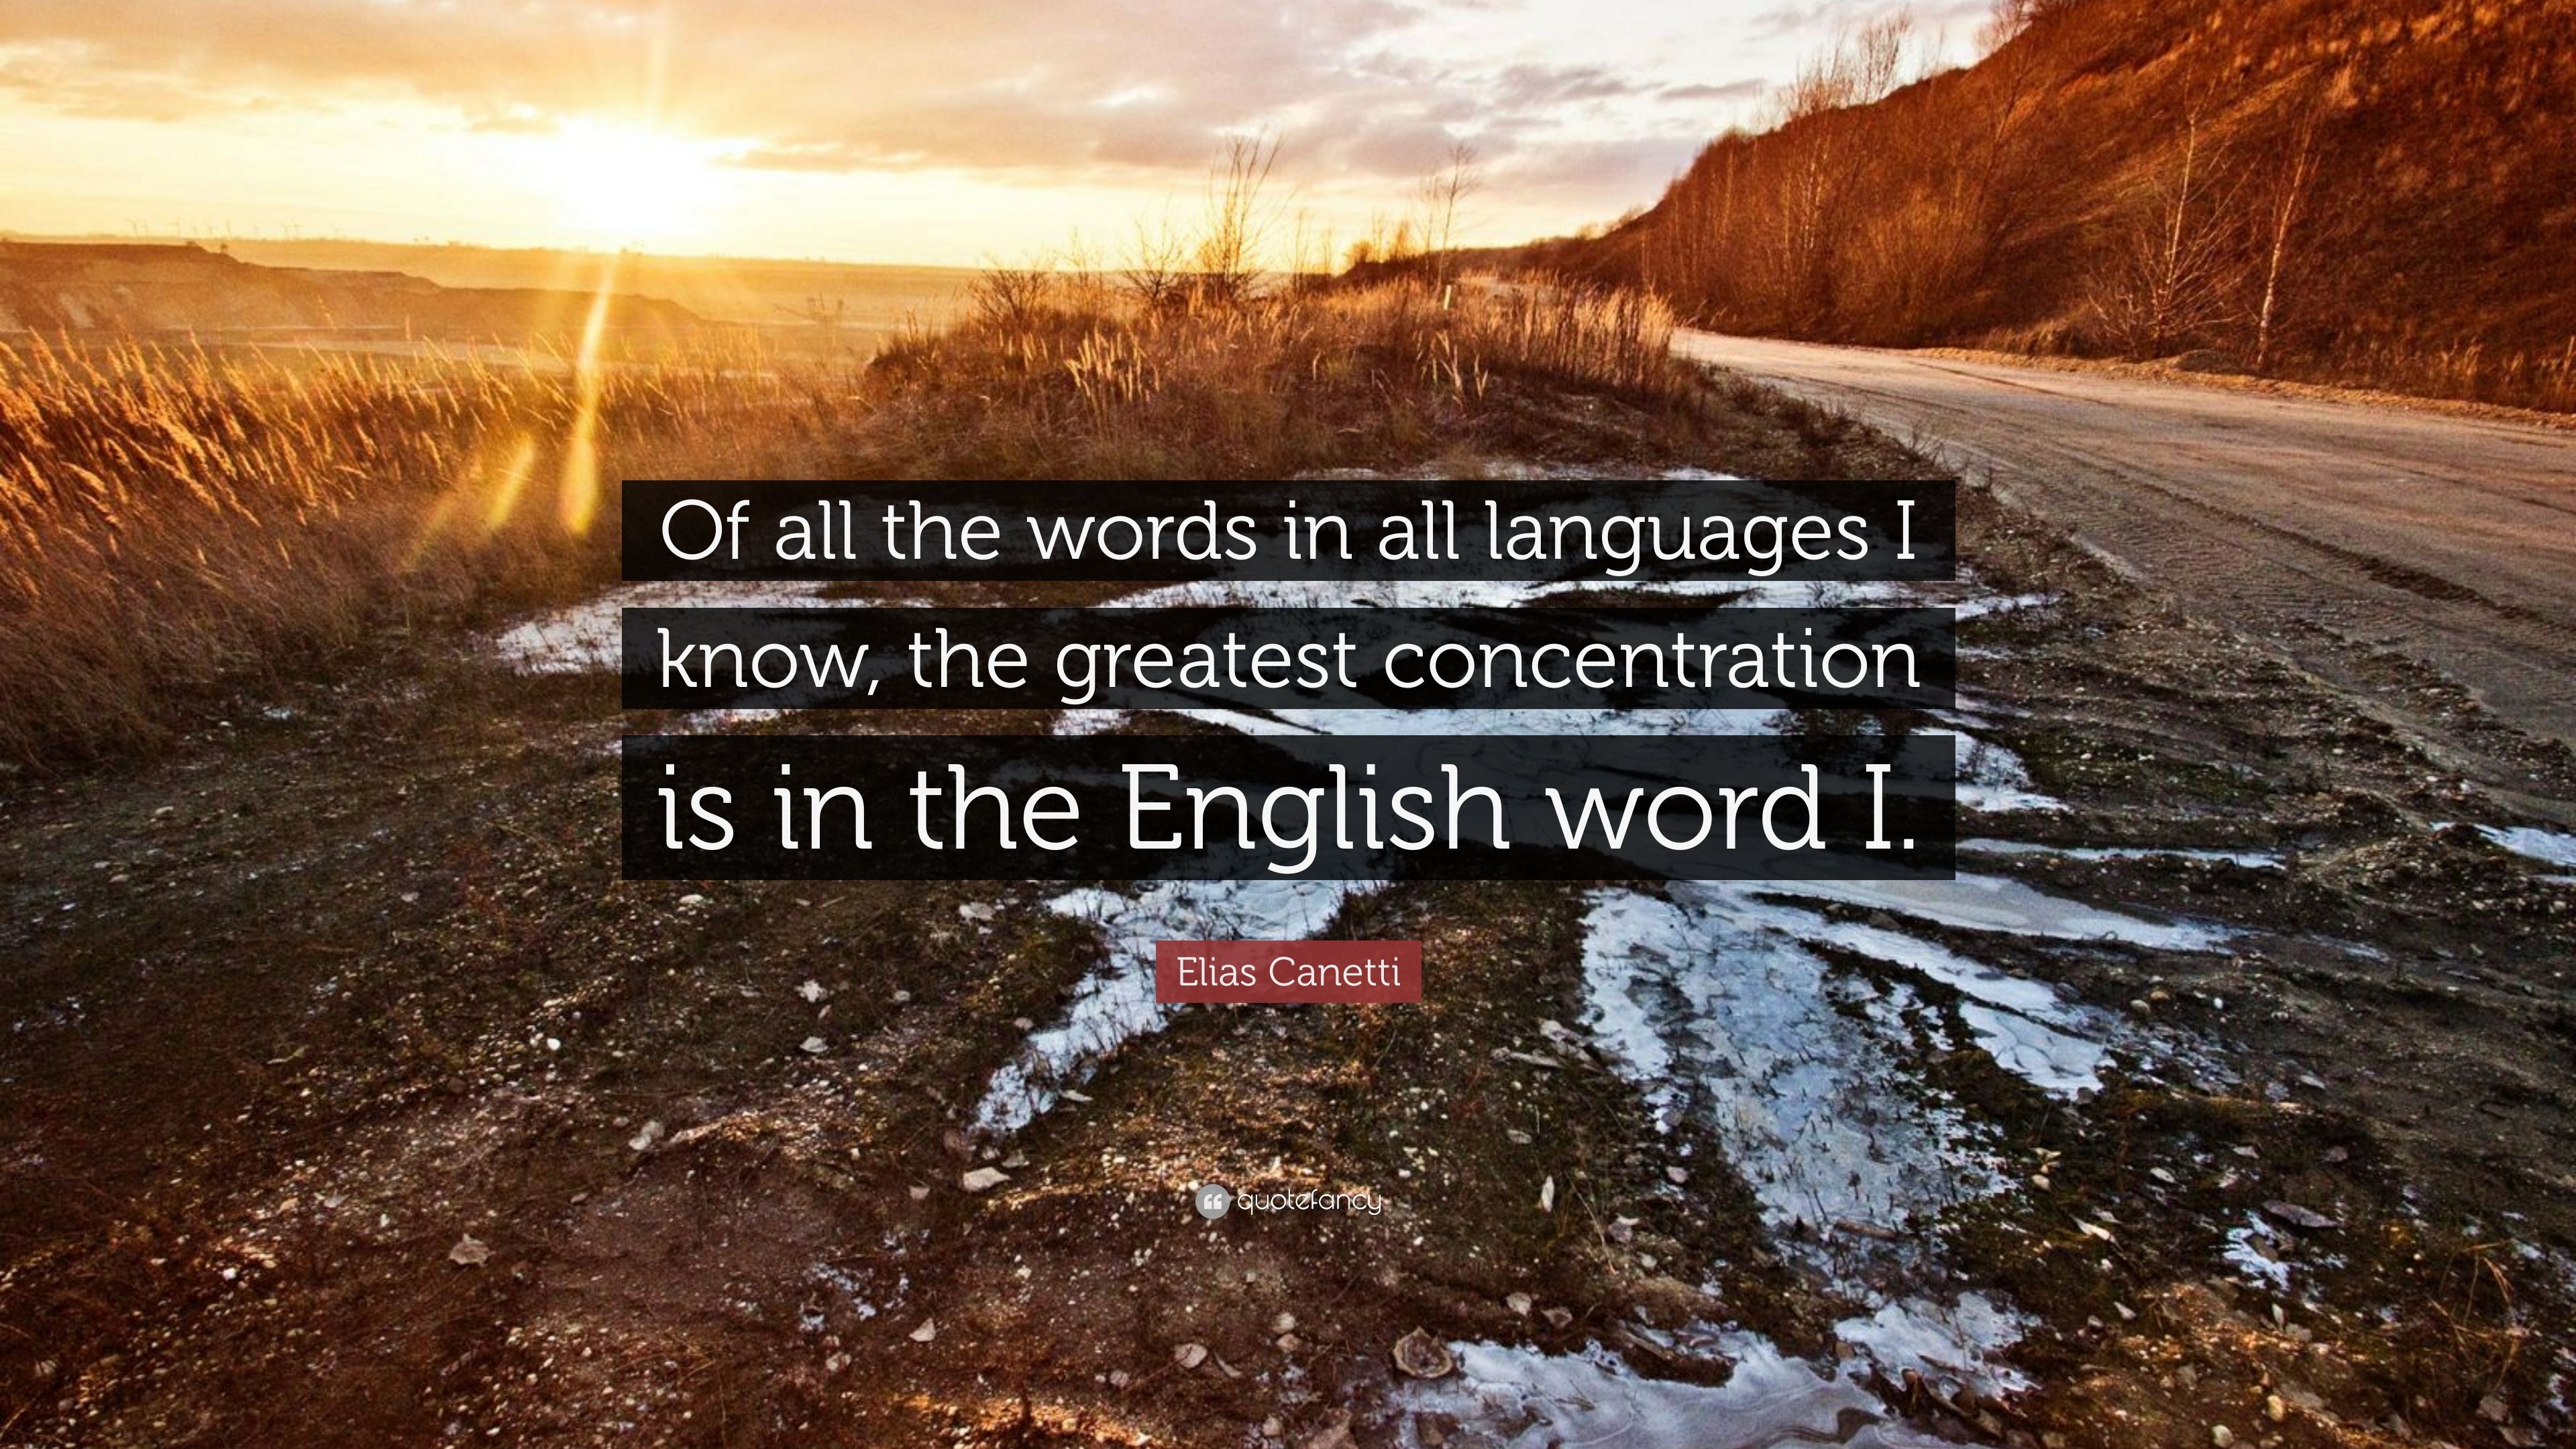 Elias Canetti Quote: “Of all the words in all languages I know